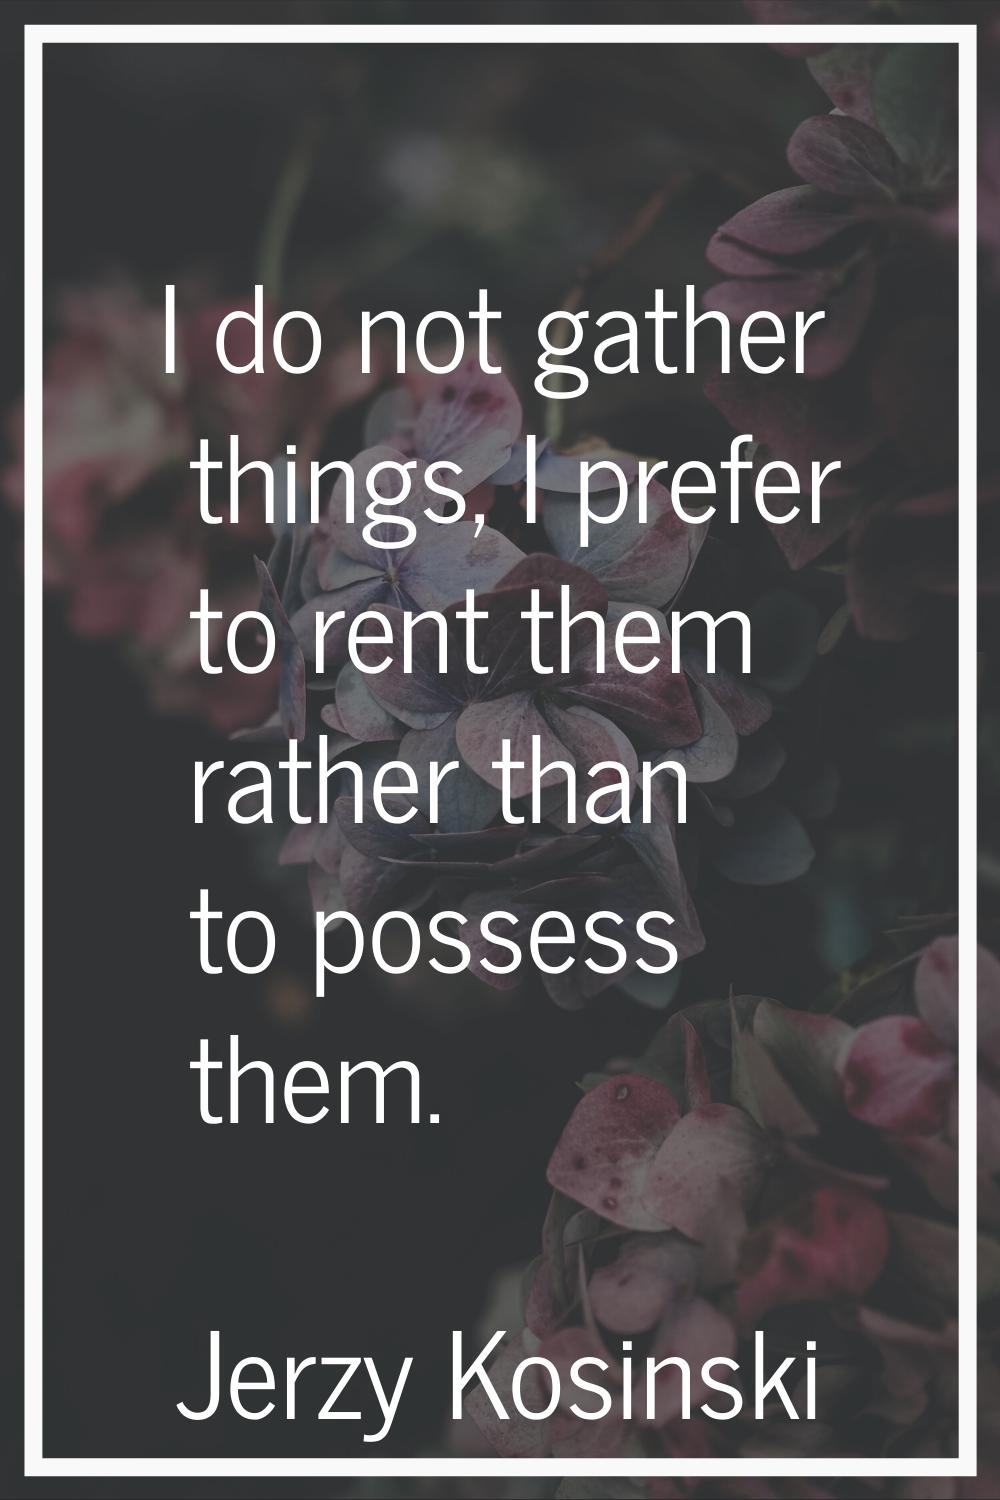 I do not gather things, I prefer to rent them rather than to possess them.